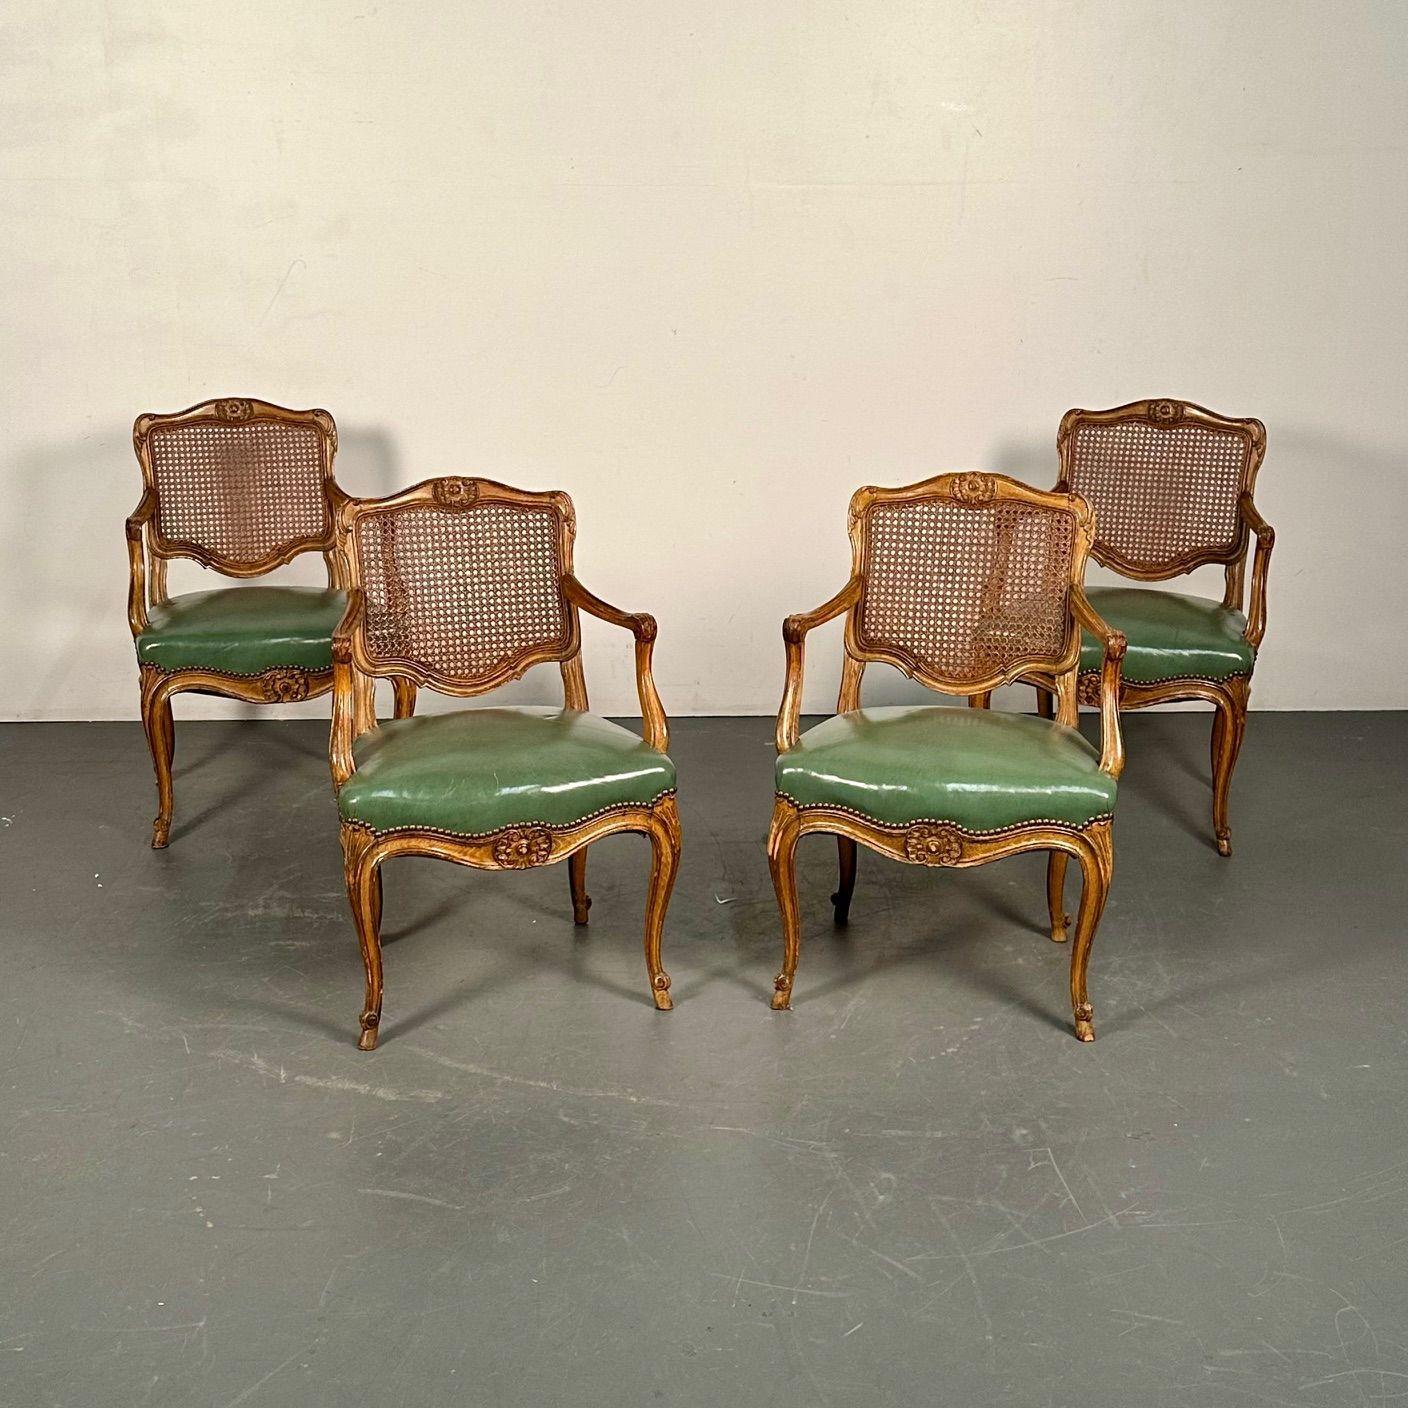 Four French Louis XVI Style Fauteuils / Lounge or Office Chairs, Cane and Leather
 
A stunning set of four chairs, can purchase only a pair if only a pair are required. Each having cane backrests with think plush green tacked leather seats. The